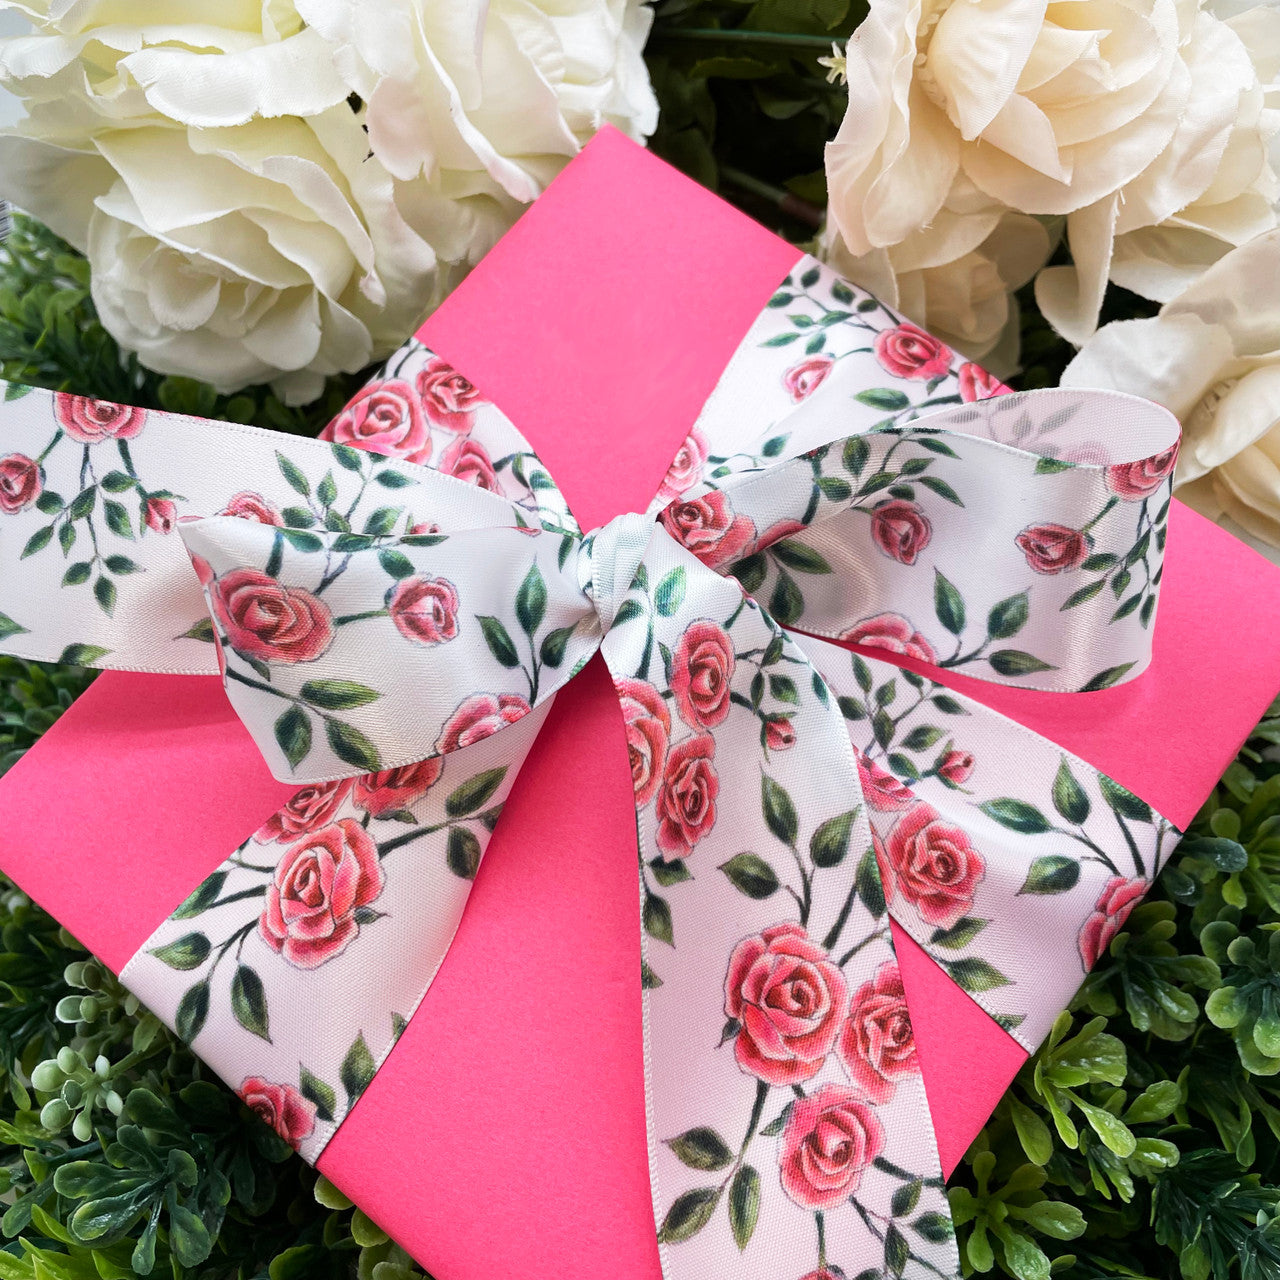 This beautiful ribbon ties the perfect bow for a Mother's Day or wedding gift!